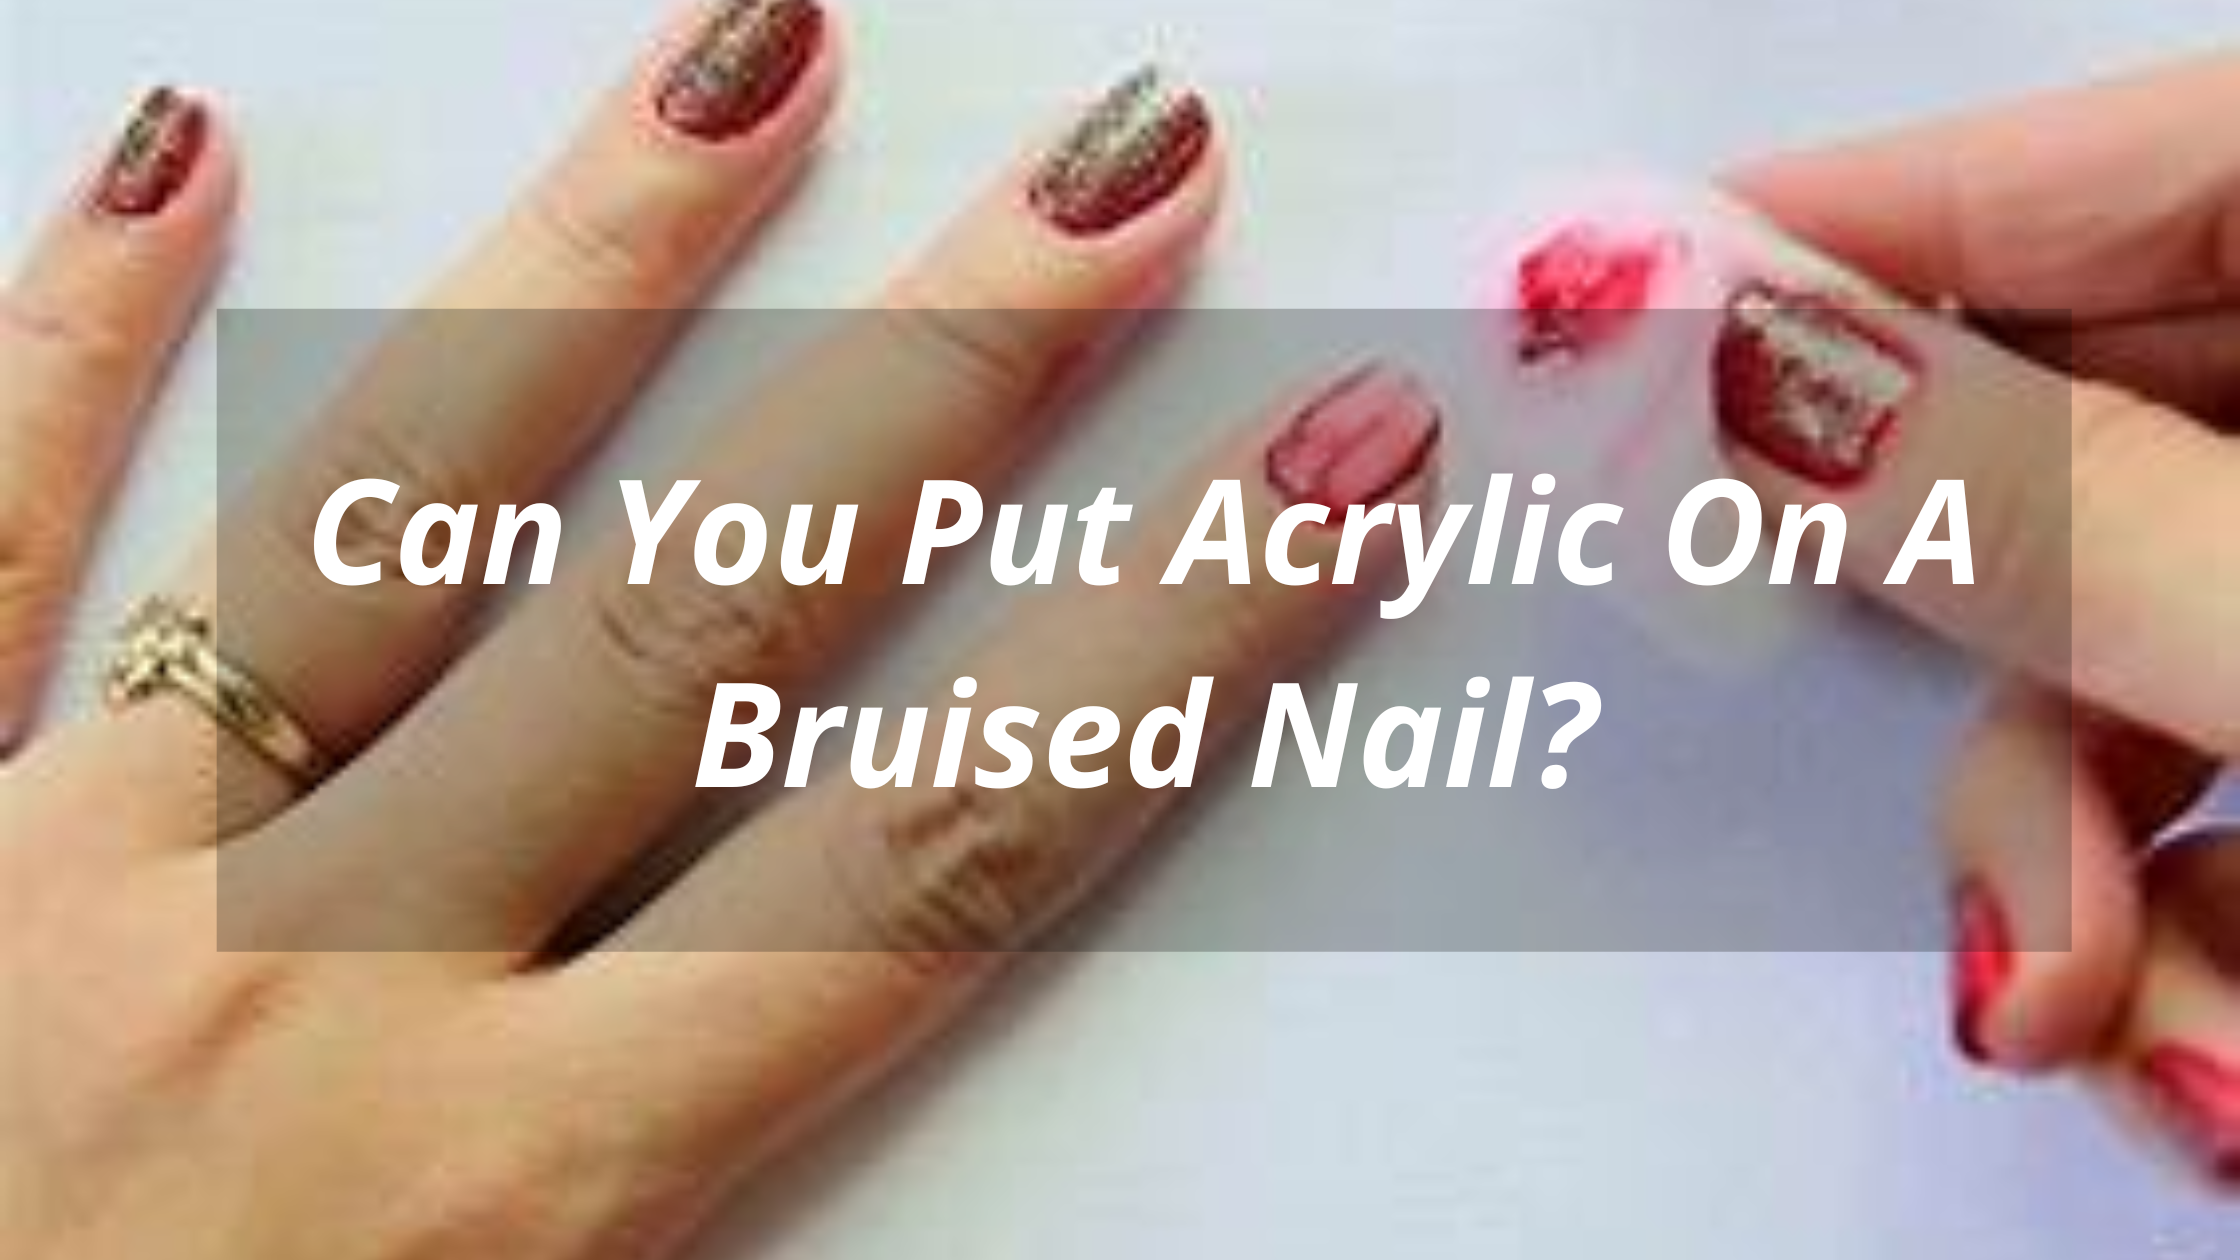 Can You Put Acrylic On A Bruised Nail?